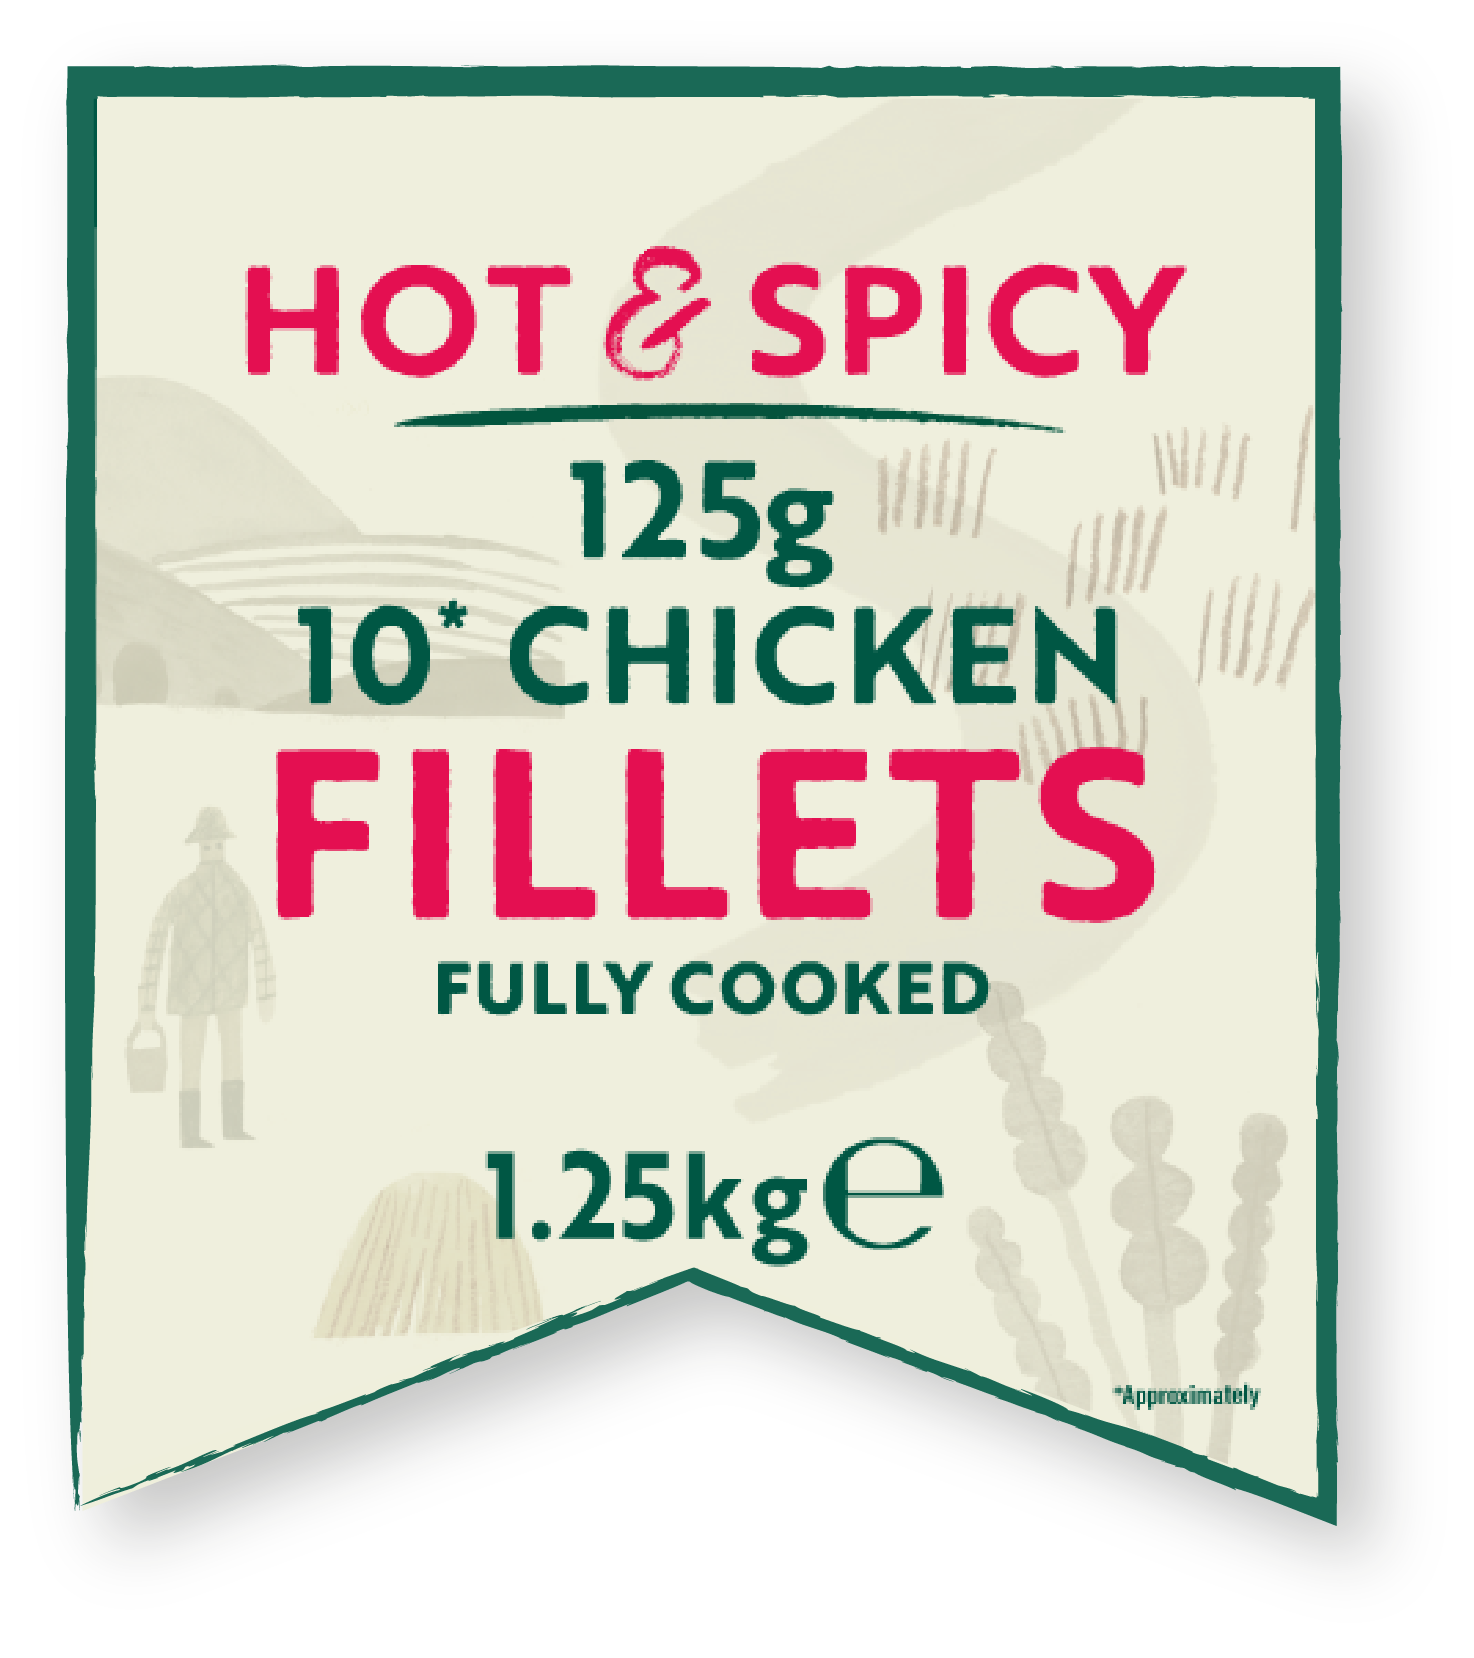 Hot and spicy chicken fillet